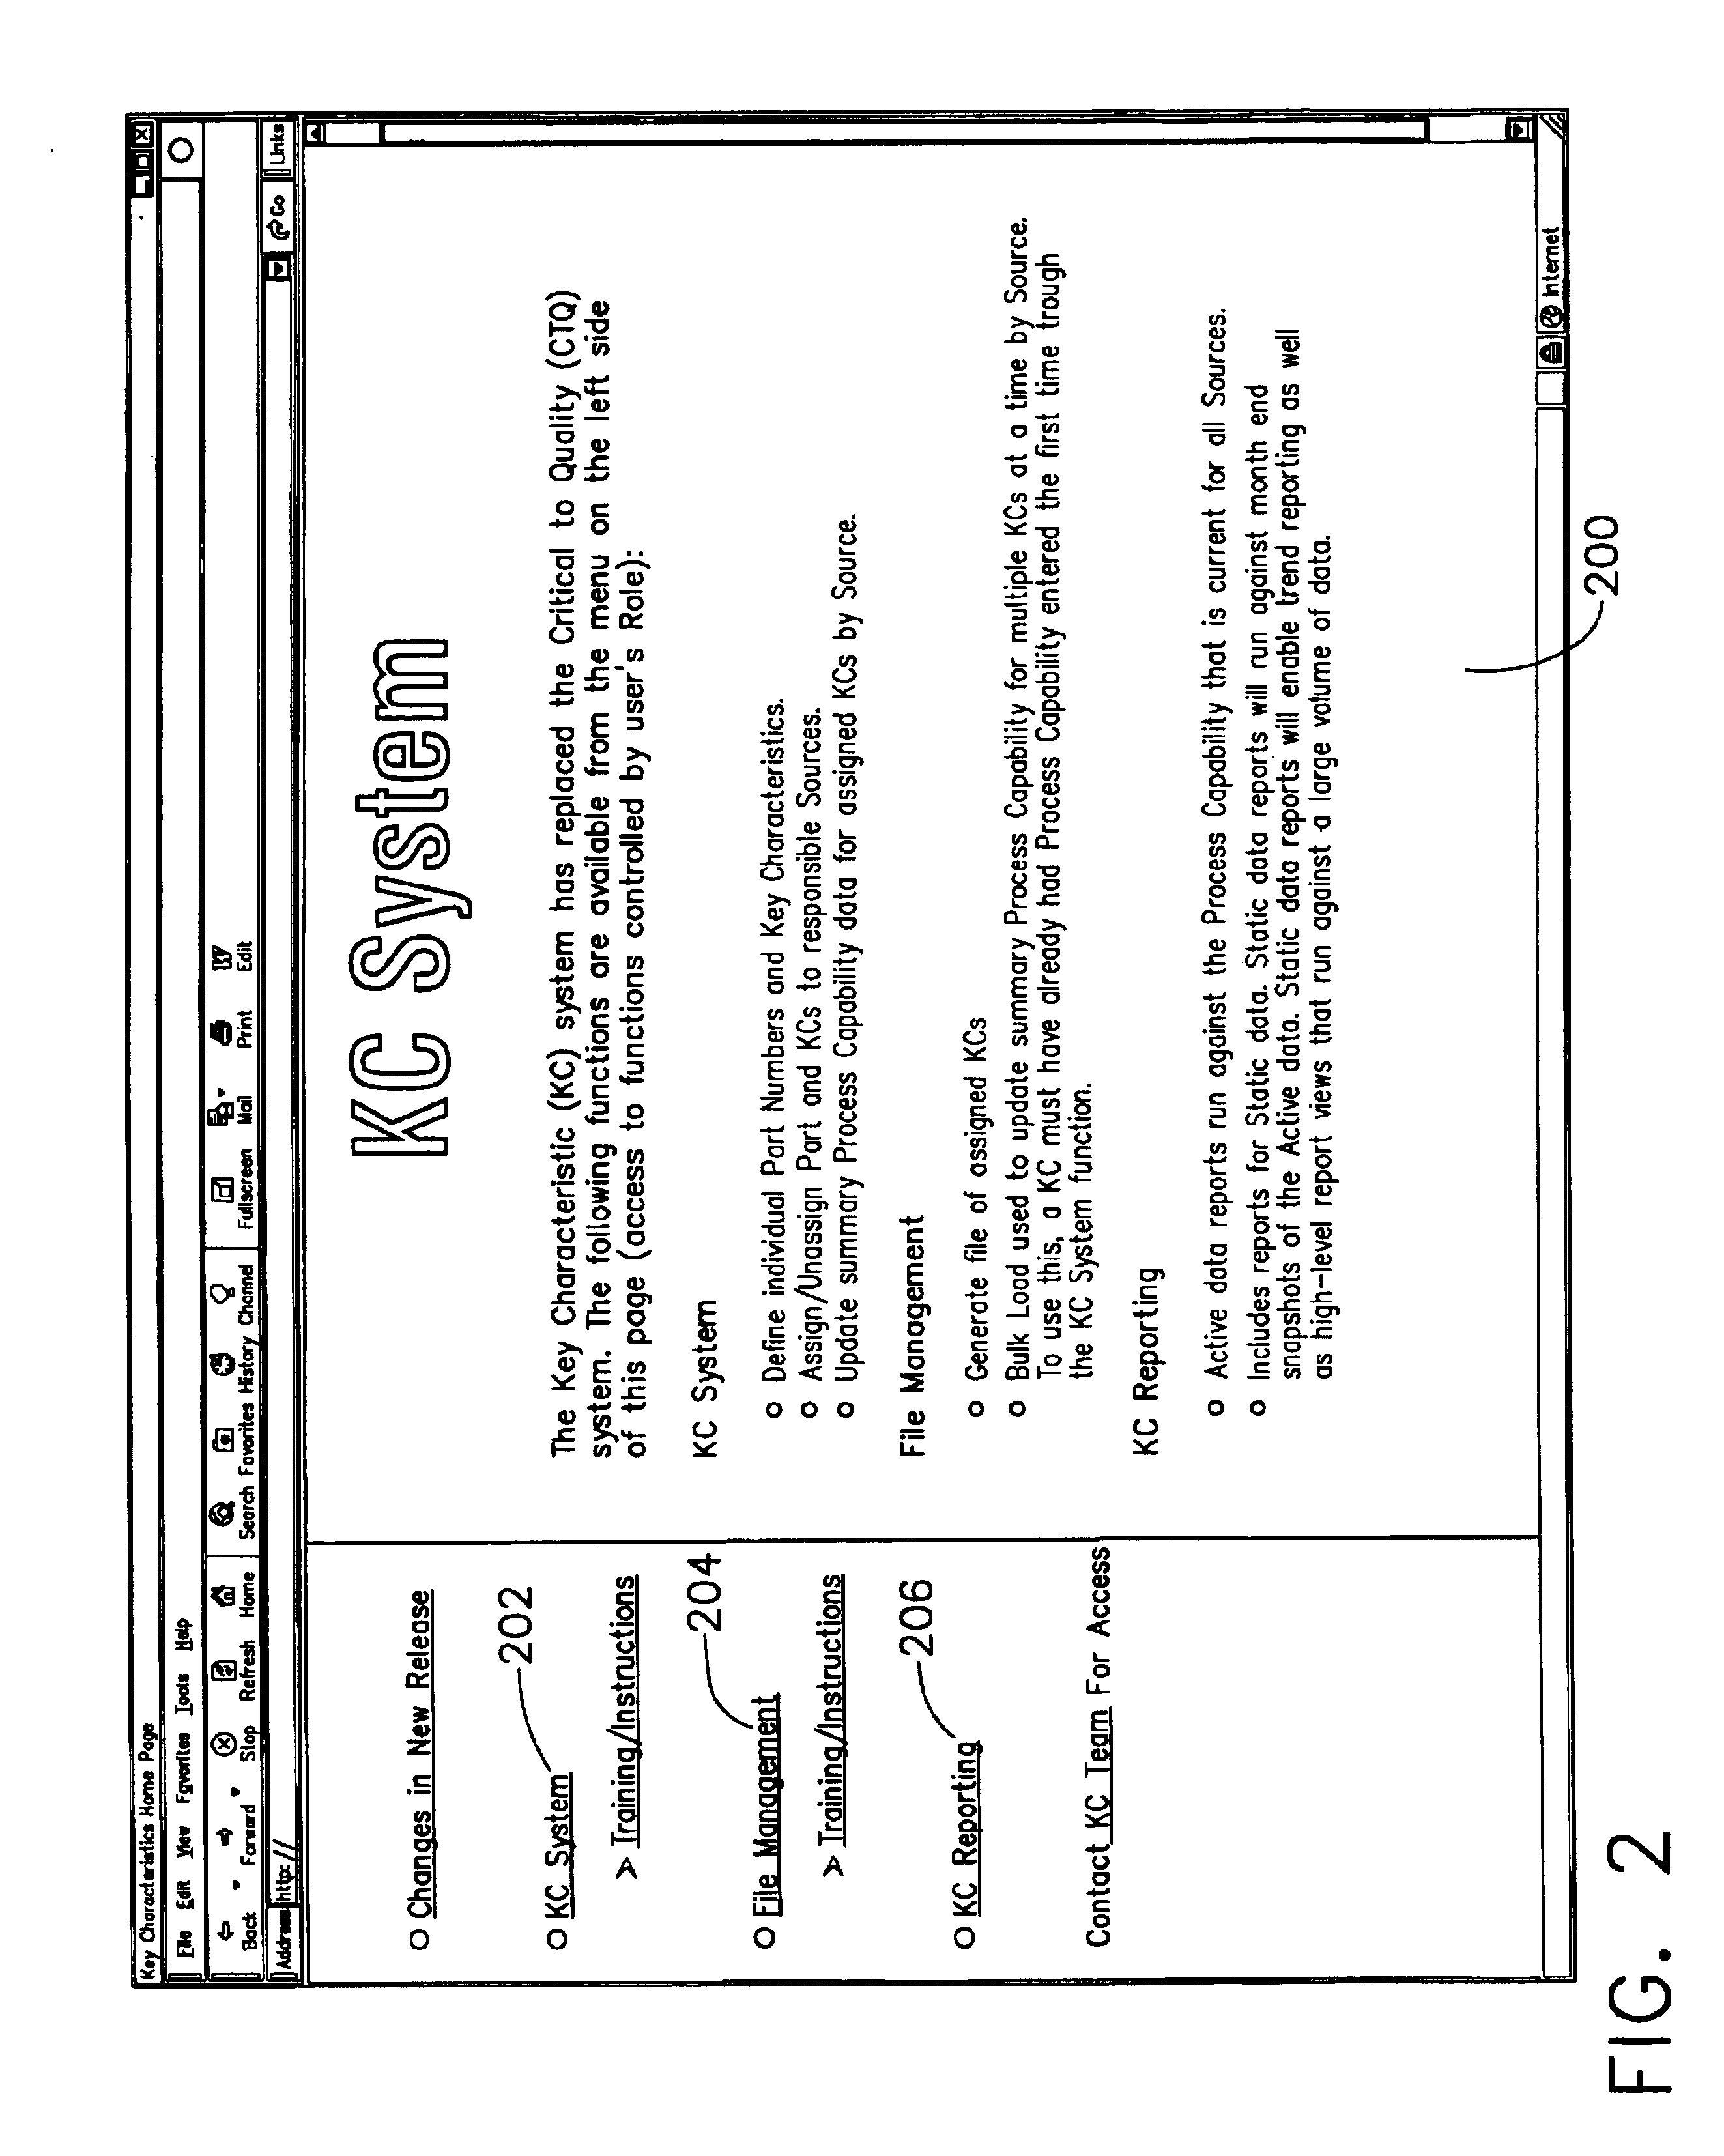 Web based process capability data collection and reporting system